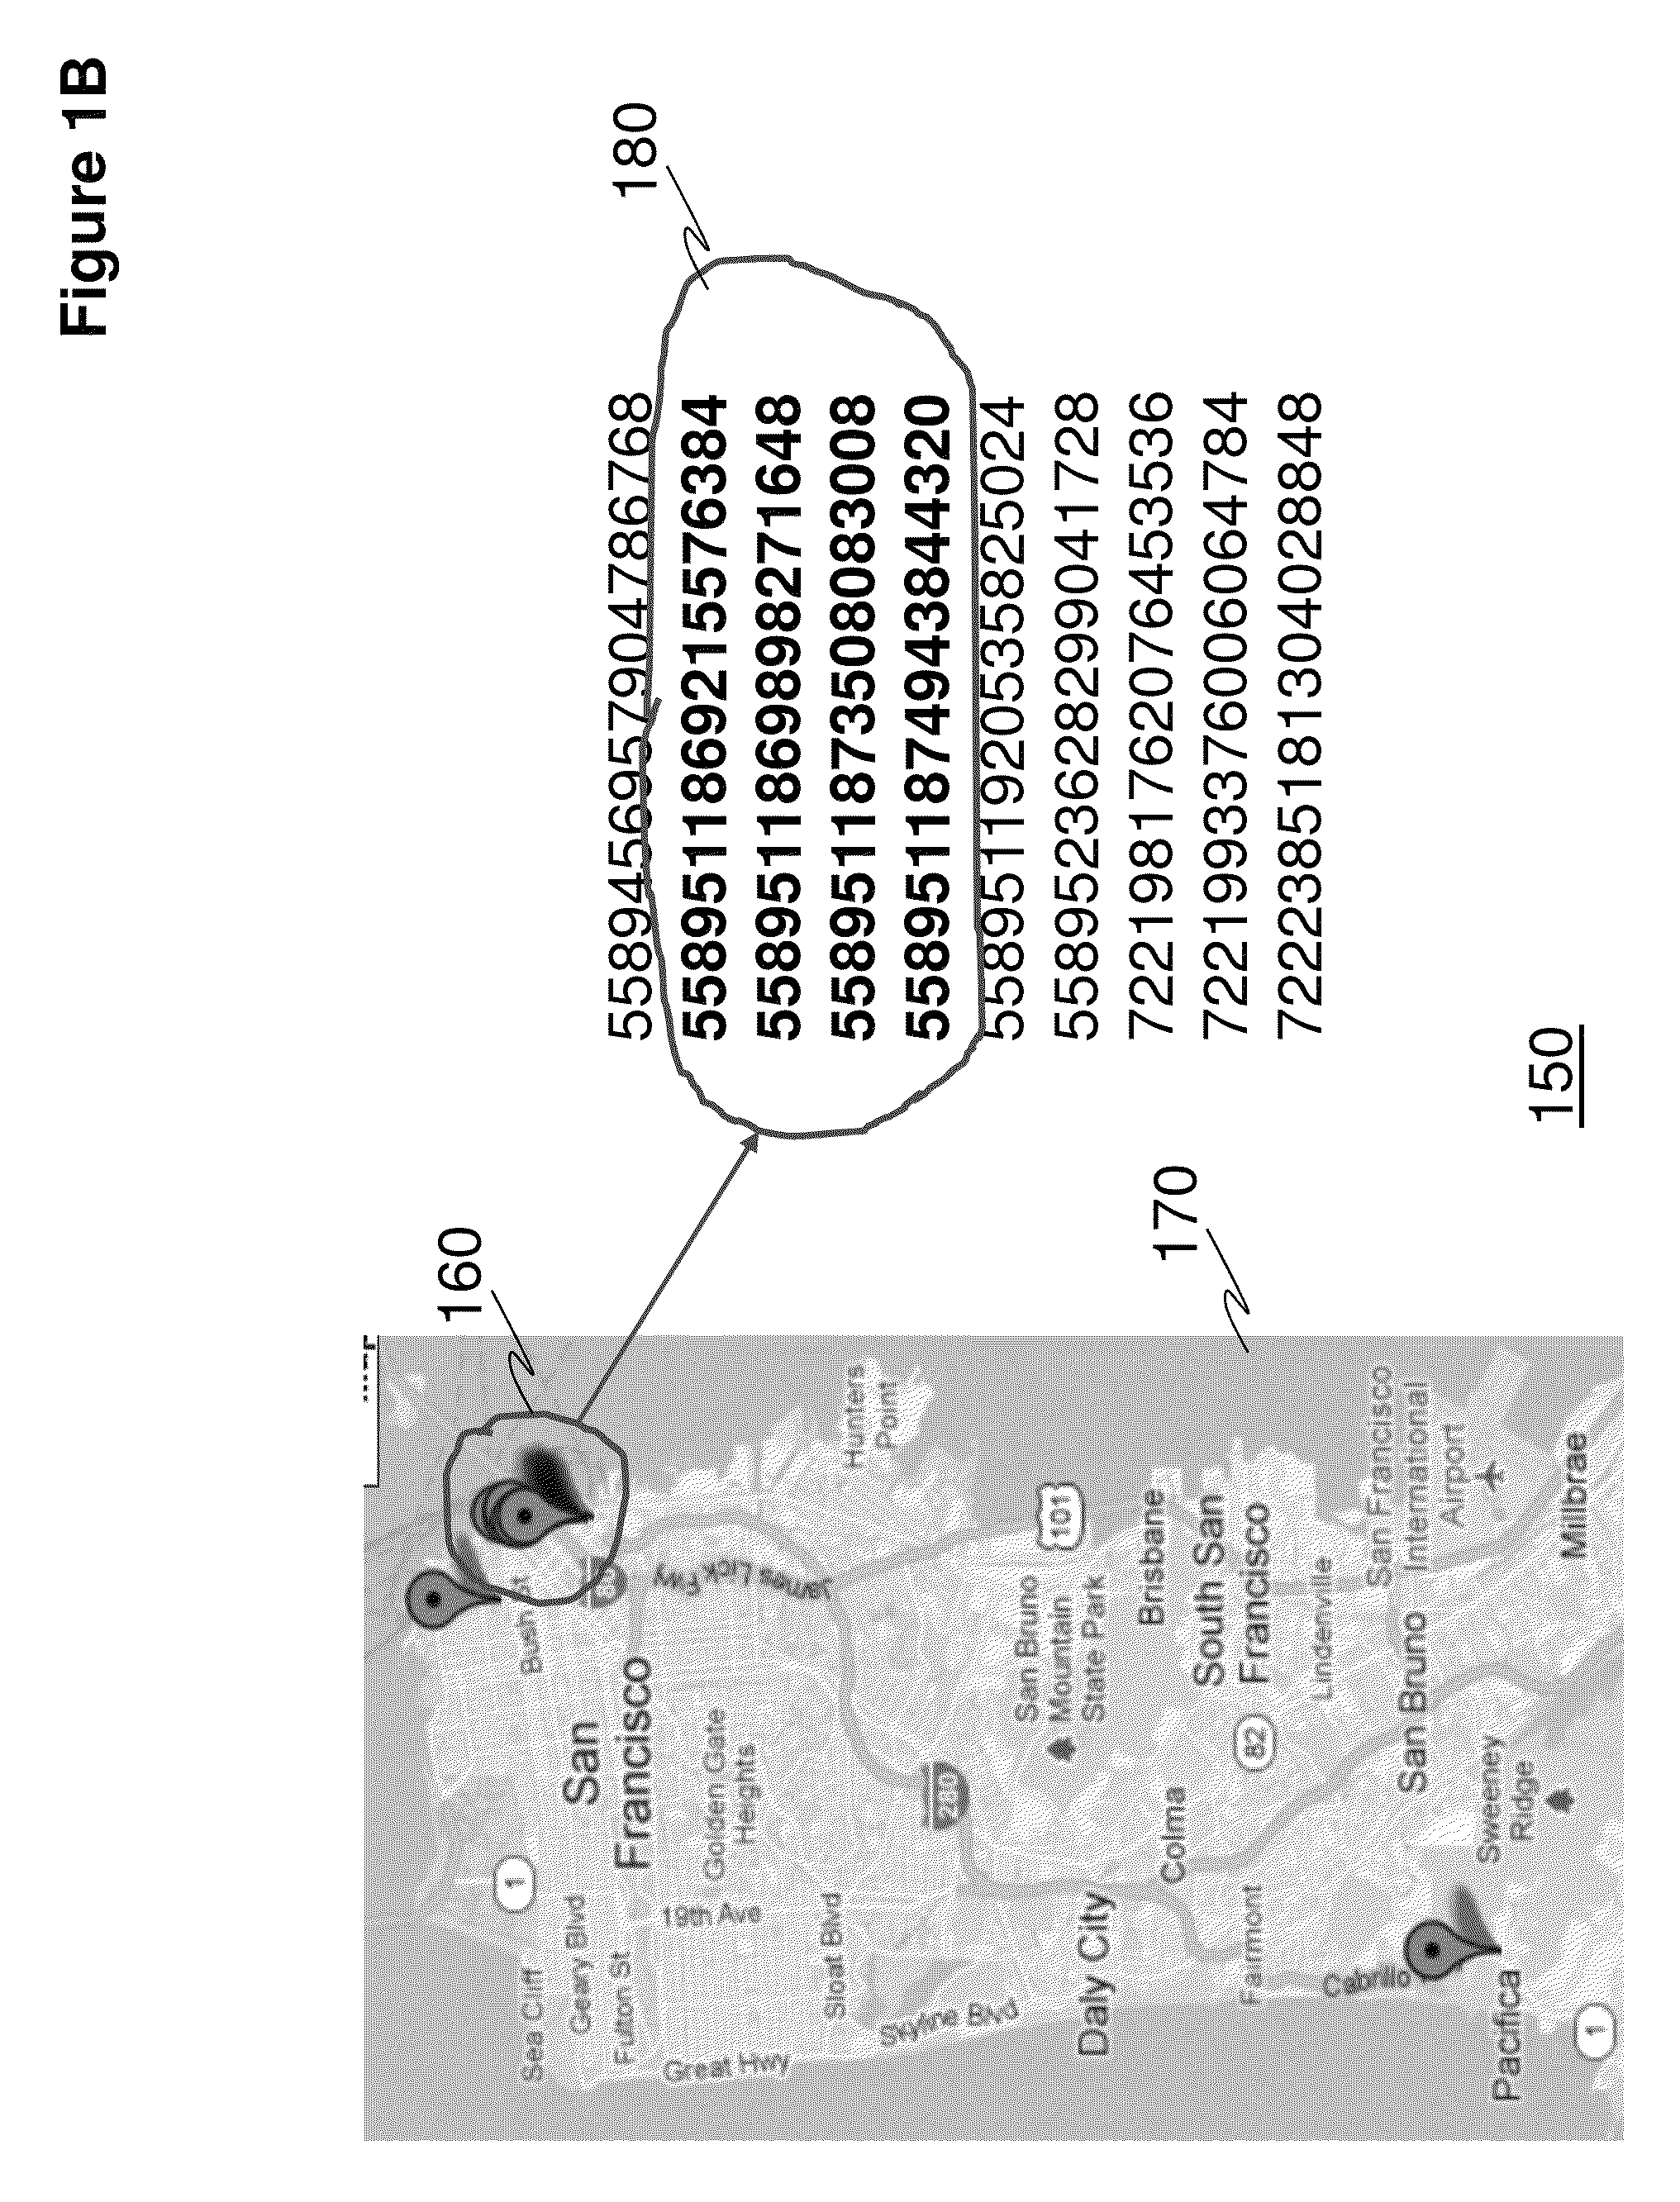 System and method for large-scale and near-real-time search of mobile device locations in arbitrary geographical boundaries